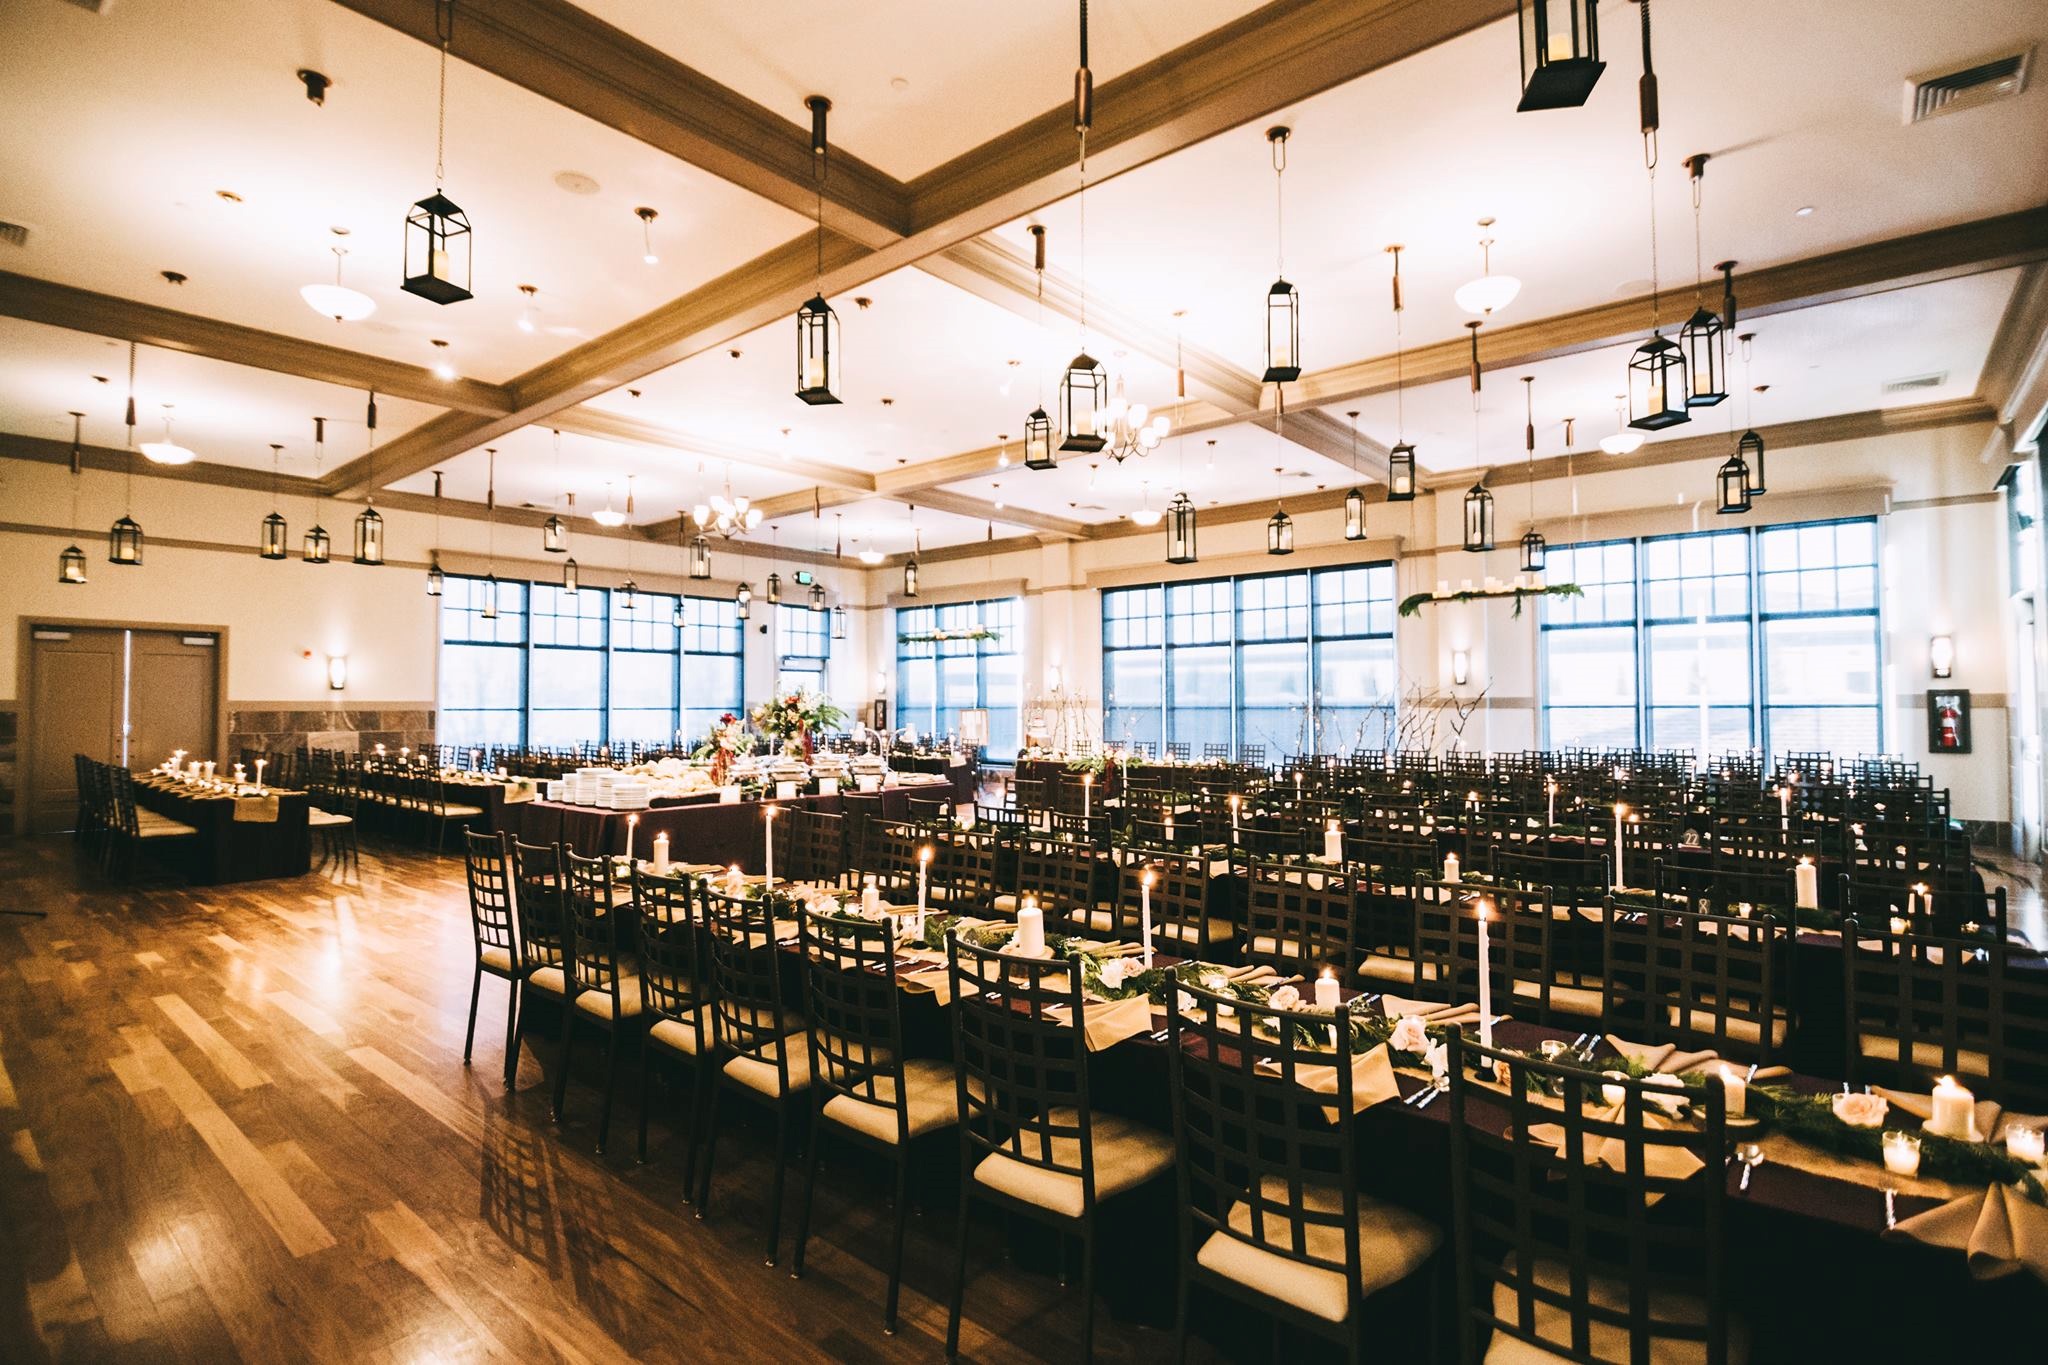 Best Wedding Venues In Des Moines Ia of the decade Learn more here 